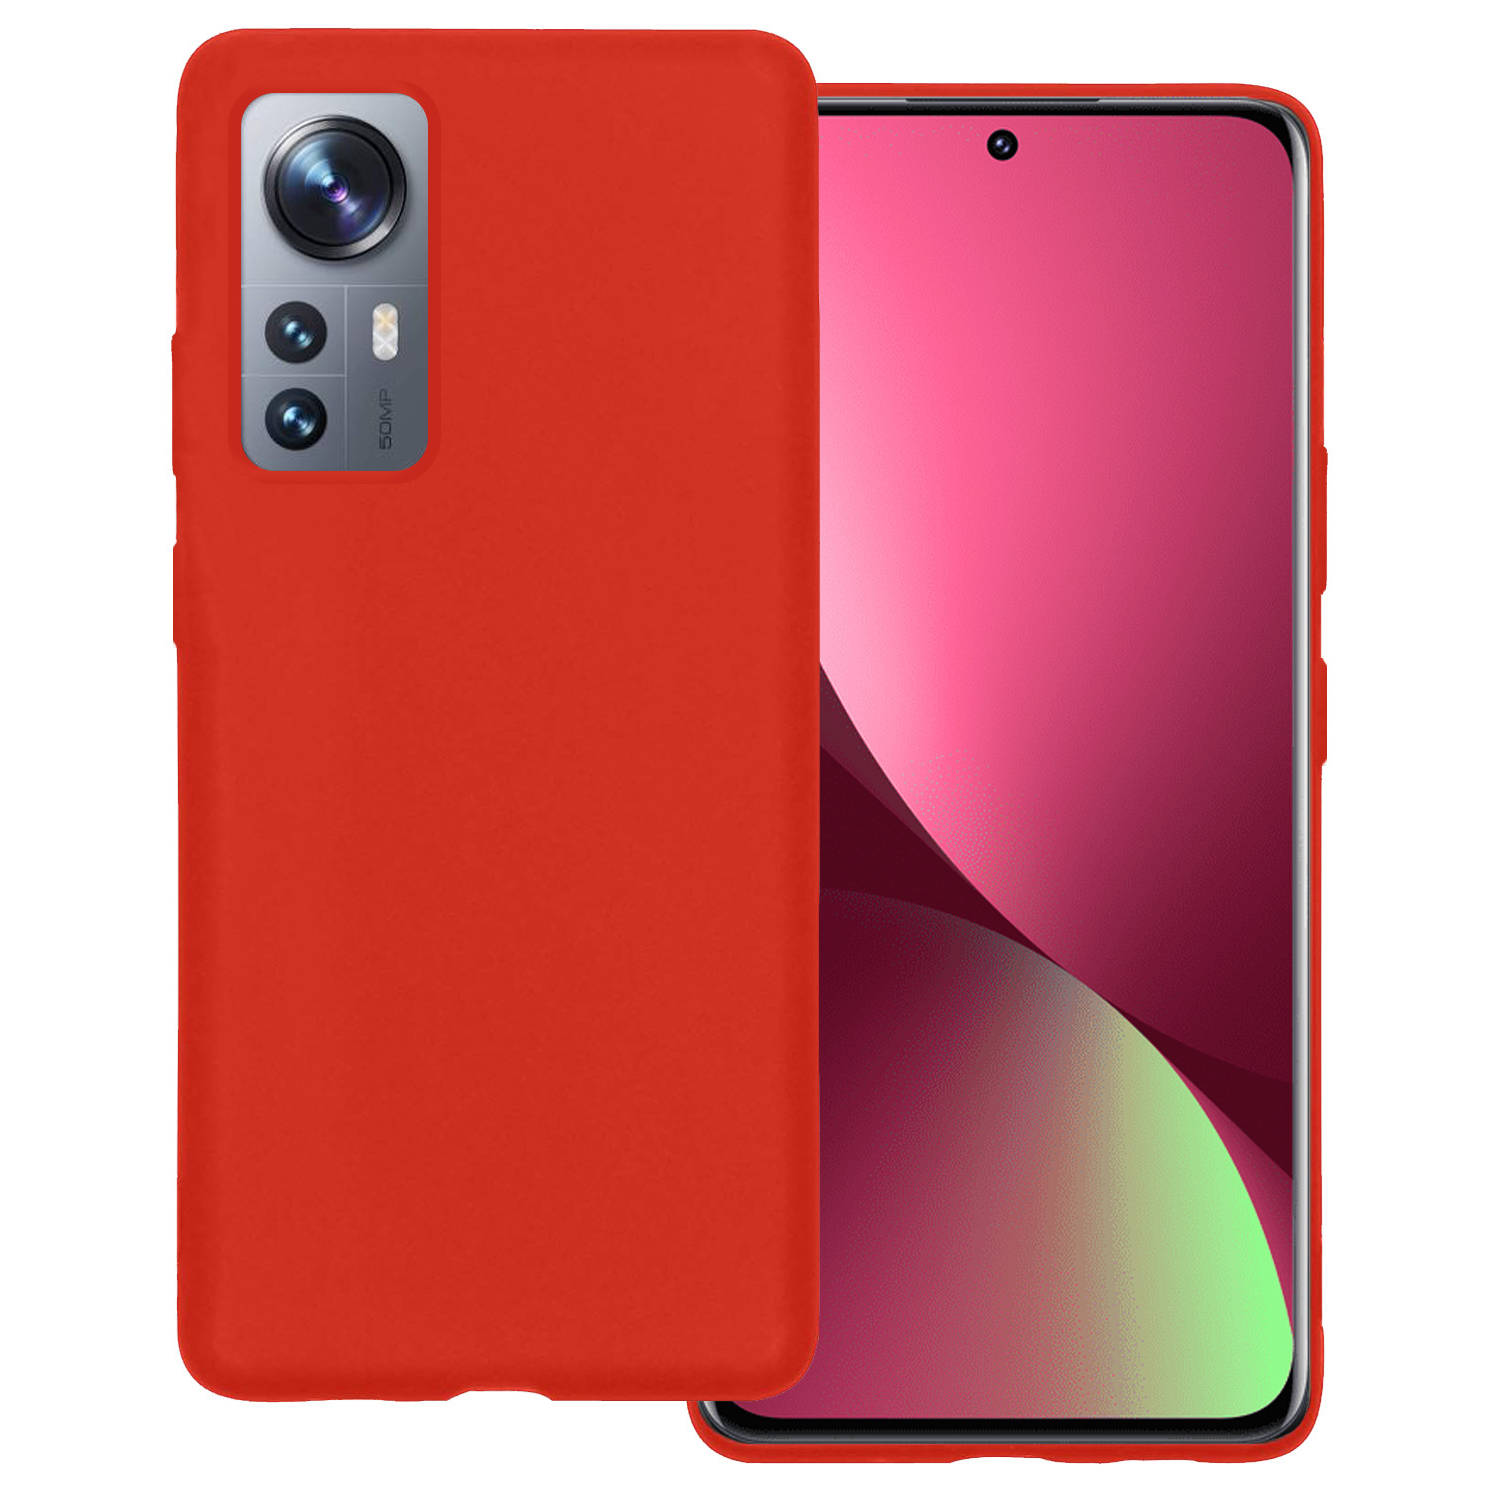 Xiaomi 12X Hoesje Rood Siliconen - Xiaomi 12X Case Back Cover Rood Silicone - Xiaomi 12X Hoesje Siliconen Hoes Rood